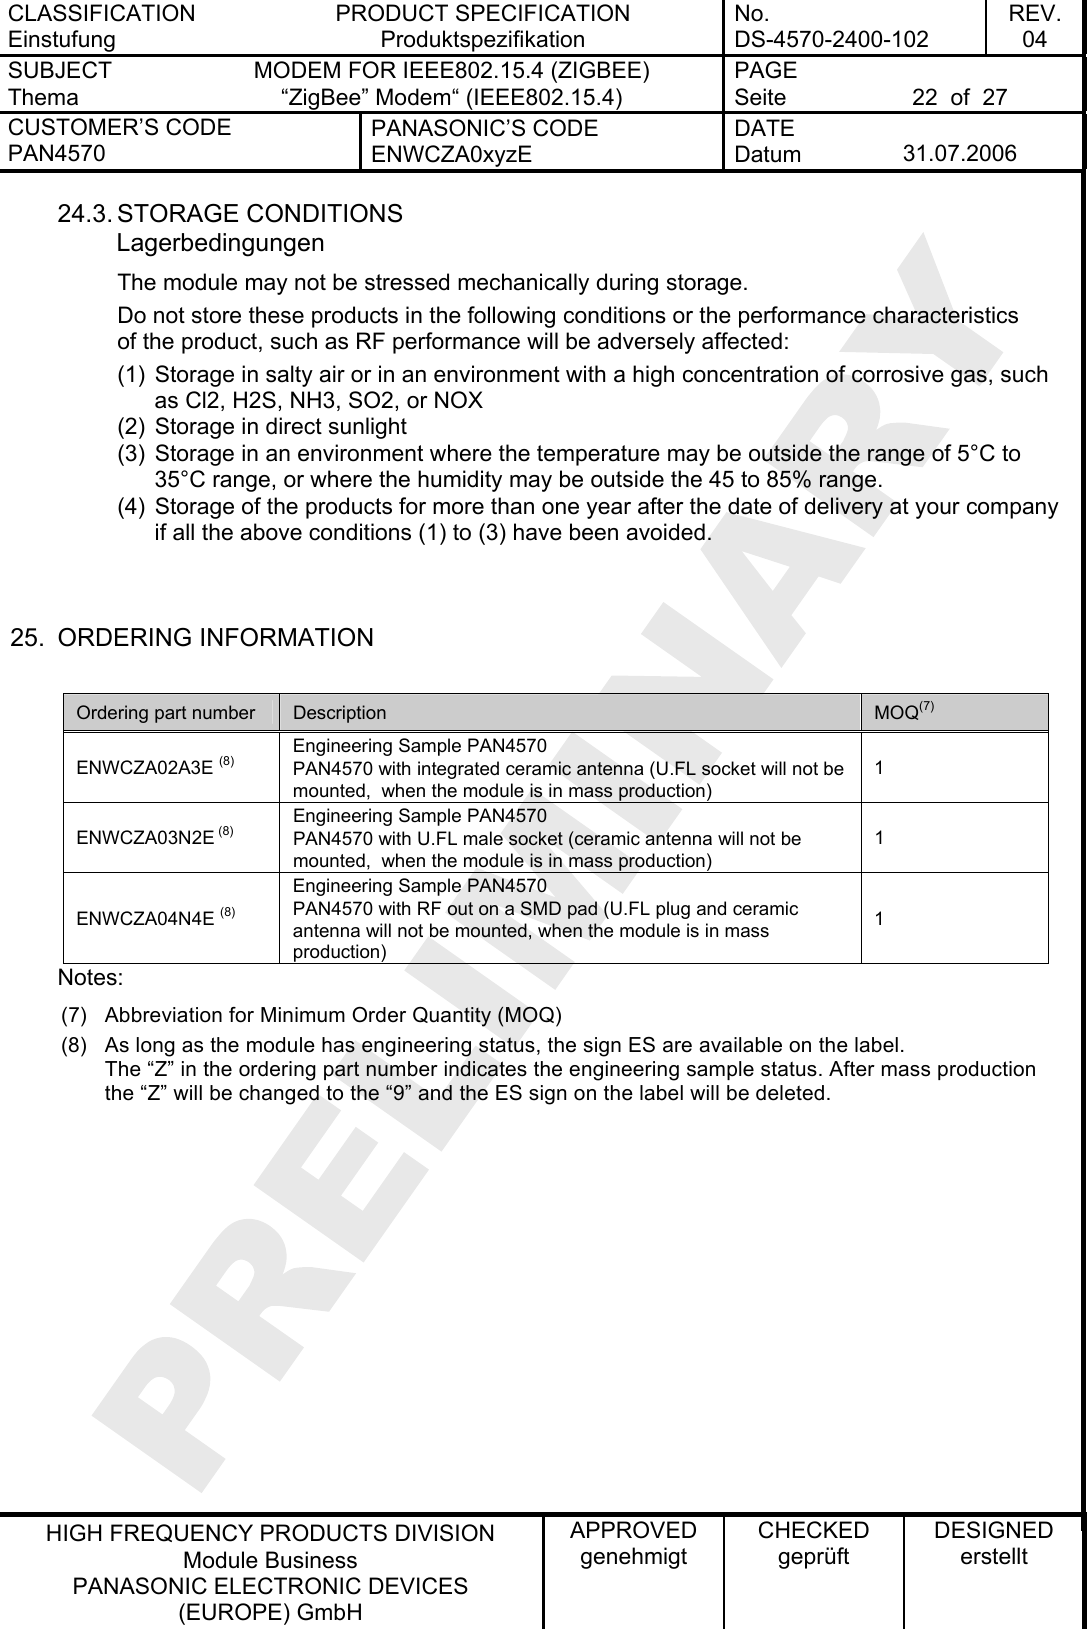 CLASSIFICATION Einstufung PRODUCT SPECIFICATION Produktspezifikation No. DS-4570-2400-102 REV. 04 SUBJECT Thema MODEM FOR IEEE802.15.4 (ZIGBEE) “ZigBee” Modem“ (IEEE802.15.4)   PAGE Seite  22  of  27 CUSTOMER’S CODE PAN4570 PANASONIC’S CODE ENWCZA0xyzE DATE Datum  31.07.2006   HIGH FREQUENCY PRODUCTS DIVISION Module Business PANASONIC ELECTRONIC DEVICES  (EUROPE) GmbH APPROVED genehmigt CHECKED geprüft DESIGNED erstellt 24.3. STORAGE CONDITIONS Lagerbedingungen The module may not be stressed mechanically during storage. Do not store these products in the following conditions or the performance characteristics of the product, such as RF performance will be adversely affected: (1)  Storage in salty air or in an environment with a high concentration of corrosive gas, such as Cl2, H2S, NH3, SO2, or NOX (2)  Storage in direct sunlight (3)  Storage in an environment where the temperature may be outside the range of 5°C to 35°C range, or where the humidity may be outside the 45 to 85% range. (4)  Storage of the products for more than one year after the date of delivery at your company if all the above conditions (1) to (3) have been avoided.   25. ORDERING INFORMATION  Ordering part number  Description  MOQ(7) ENWCZA02A3E (8) Engineering Sample PAN4570  PAN4570 with integrated ceramic antenna (U.FL socket will not be mounted,  when the module is in mass production) 1 ENWCZA03N2E (8) Engineering Sample PAN4570 PAN4570 with U.FL male socket (ceramic antenna will not be mounted,  when the module is in mass production) 1 ENWCZA04N4E (8) Engineering Sample PAN4570 PAN4570 with RF out on a SMD pad (U.FL plug and ceramic antenna will not be mounted, when the module is in mass production) 1 Notes: (7)  Abbreviation for Minimum Order Quantity (MOQ) (8)  As long as the module has engineering status, the sign ES are available on the label. The “Z” in the ordering part number indicates the engineering sample status. After mass production the “Z” will be changed to the “9” and the ES sign on the label will be deleted.  